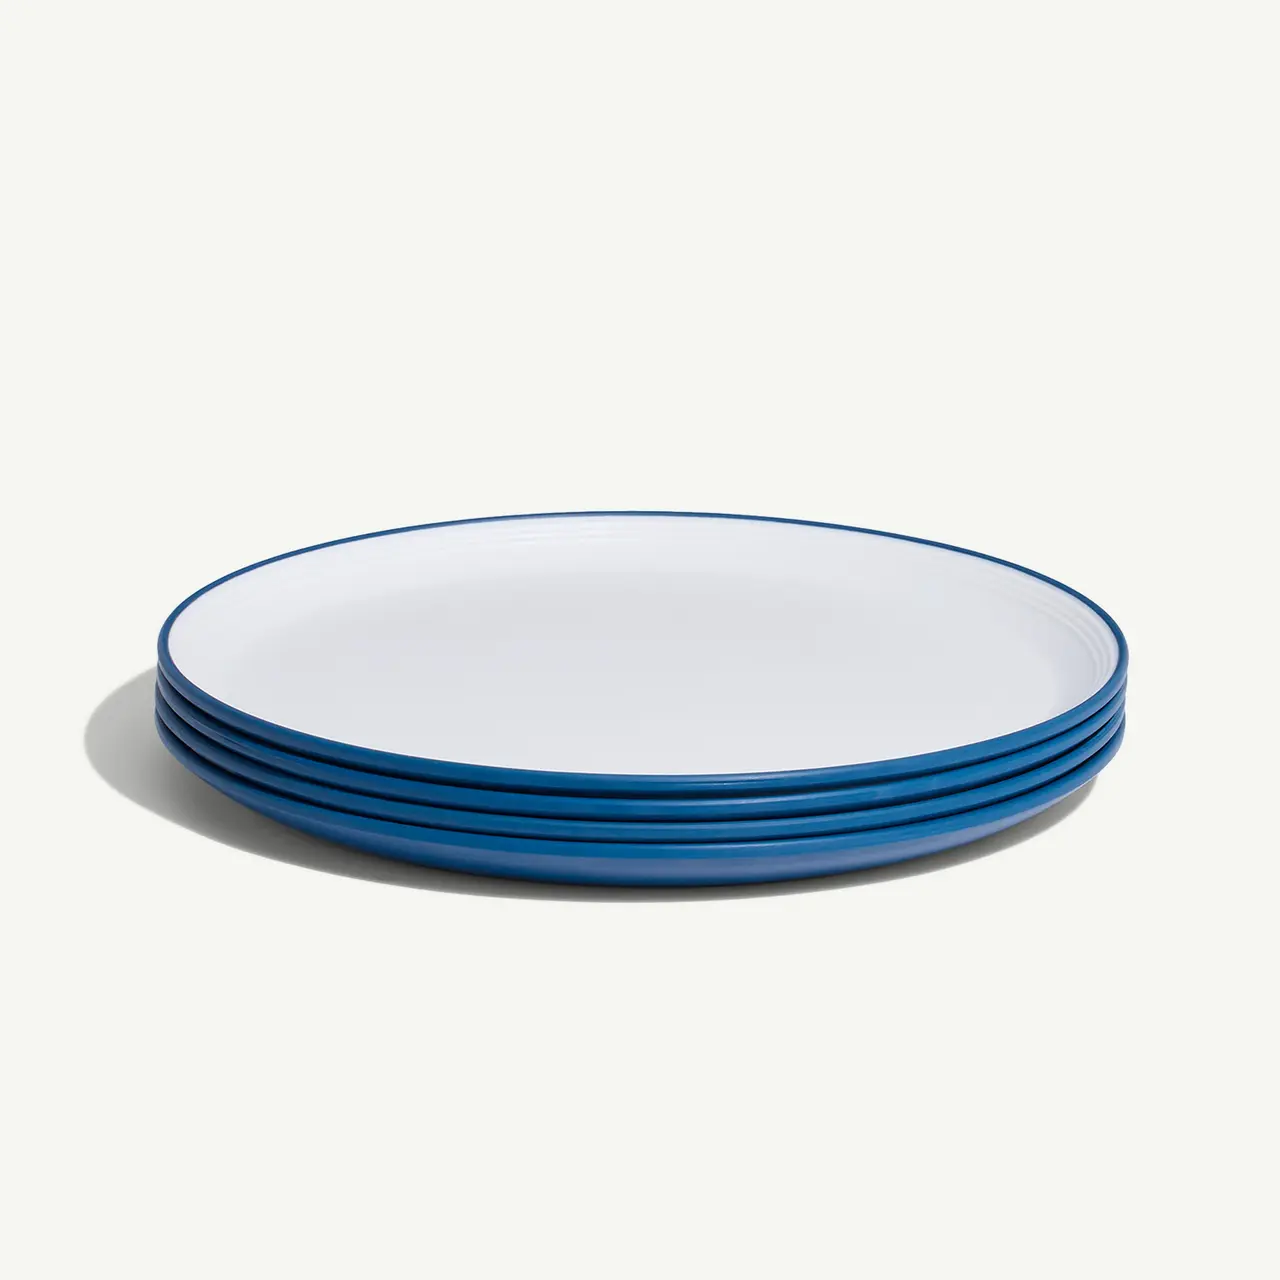 A stack of clean white plates with blue rims on a neutral background.